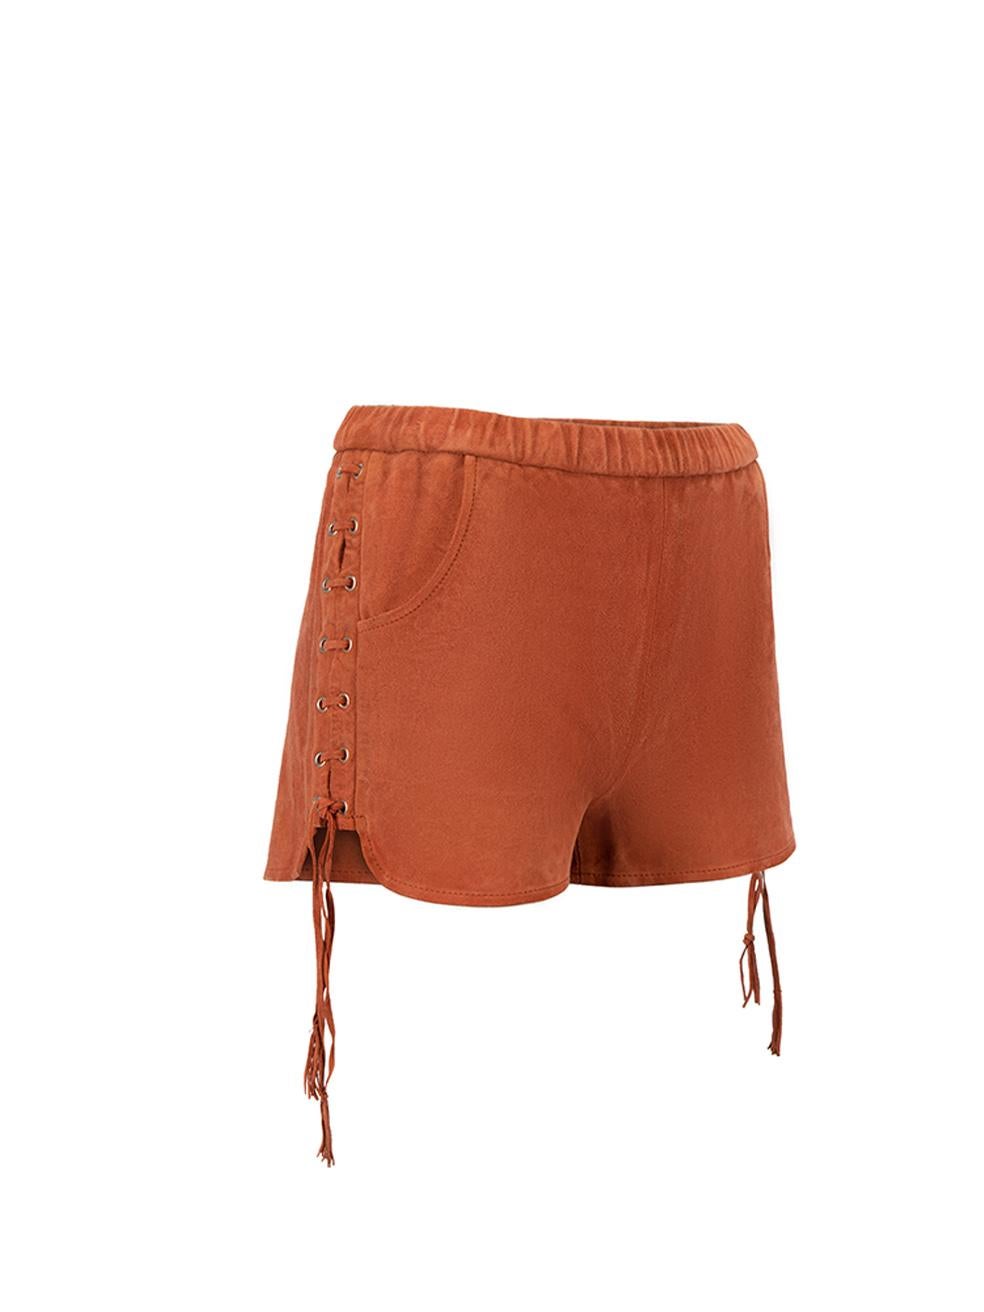 CONDITION is Very good. Minimal wear to shorts is evident. Minimal wear to the overall colour through use on this used Maje designer resale item.



Details


Coral

Suede

Shorts

Low rise

Lace accent on sides

Elasticated waistband

Front side